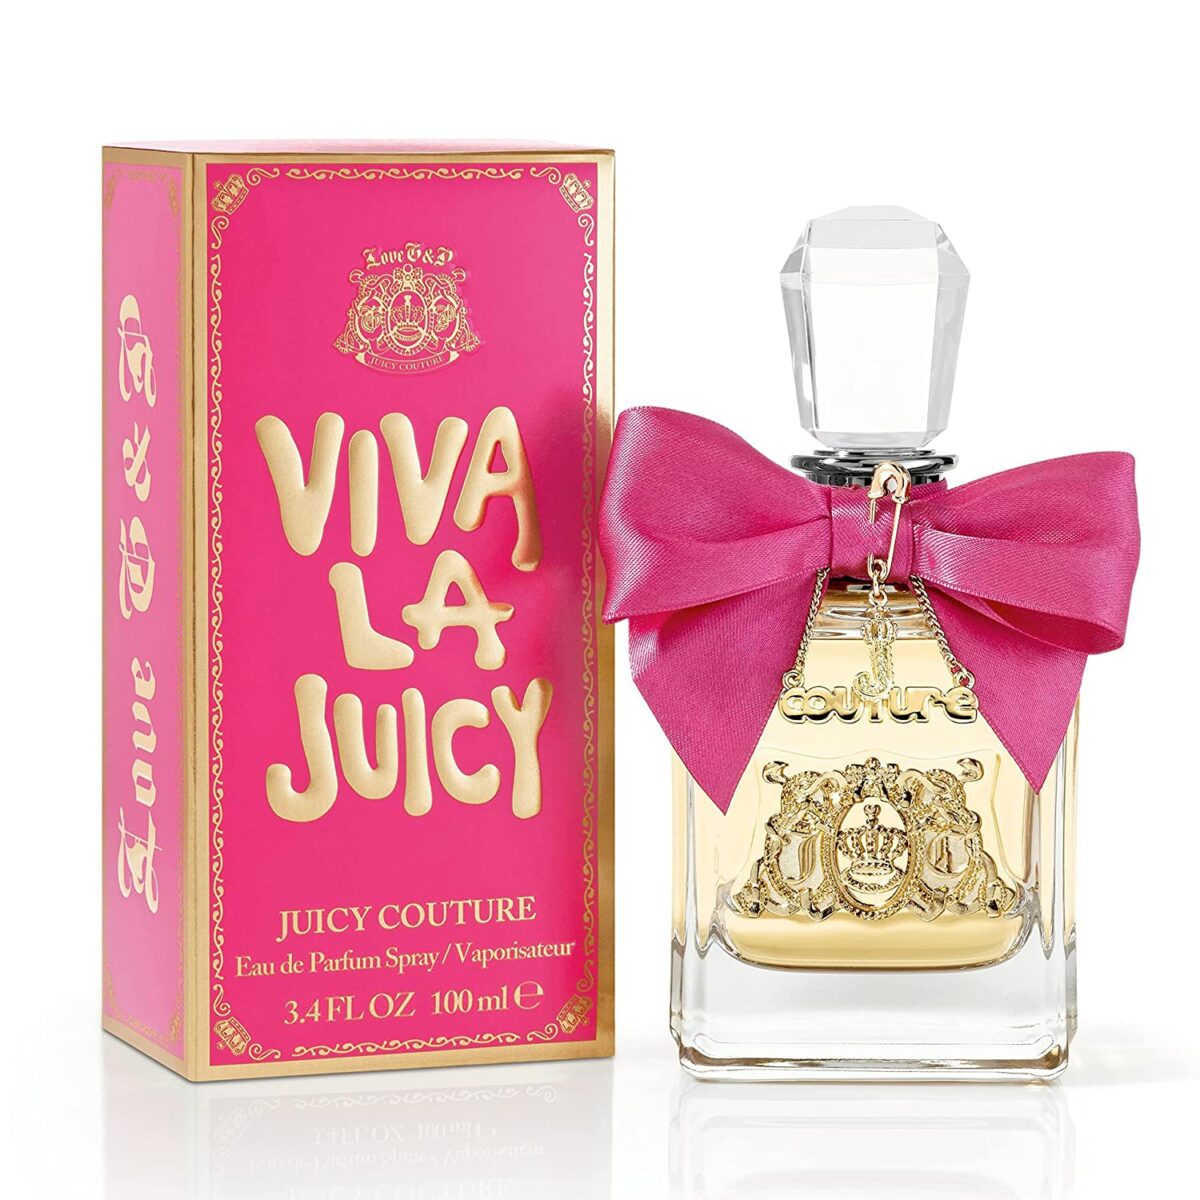 A bottle of Juicy Couture perfume for women | The Dating Divas